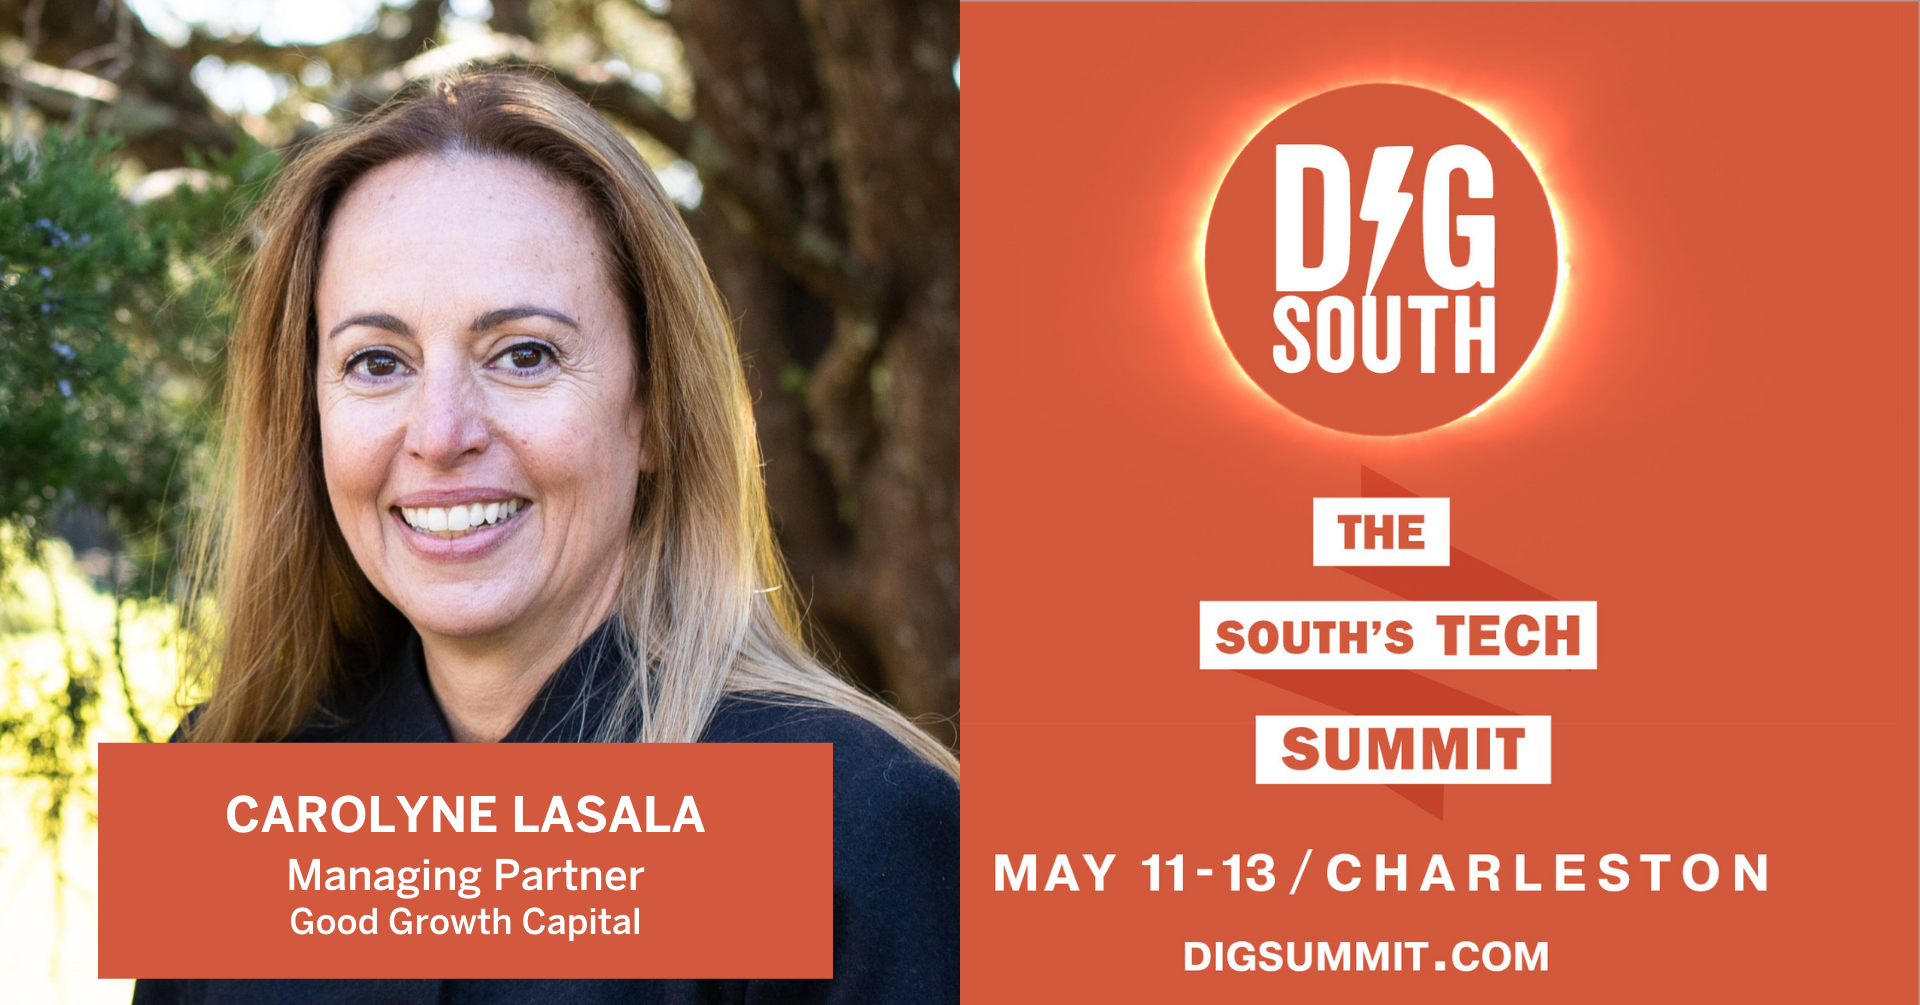 Good Growth Capital Partner to Speak at Dig South Tech Summit, ATL Exec Launches Platform Connecting IT Talent, Epic Partners with Sony + KIRKBI